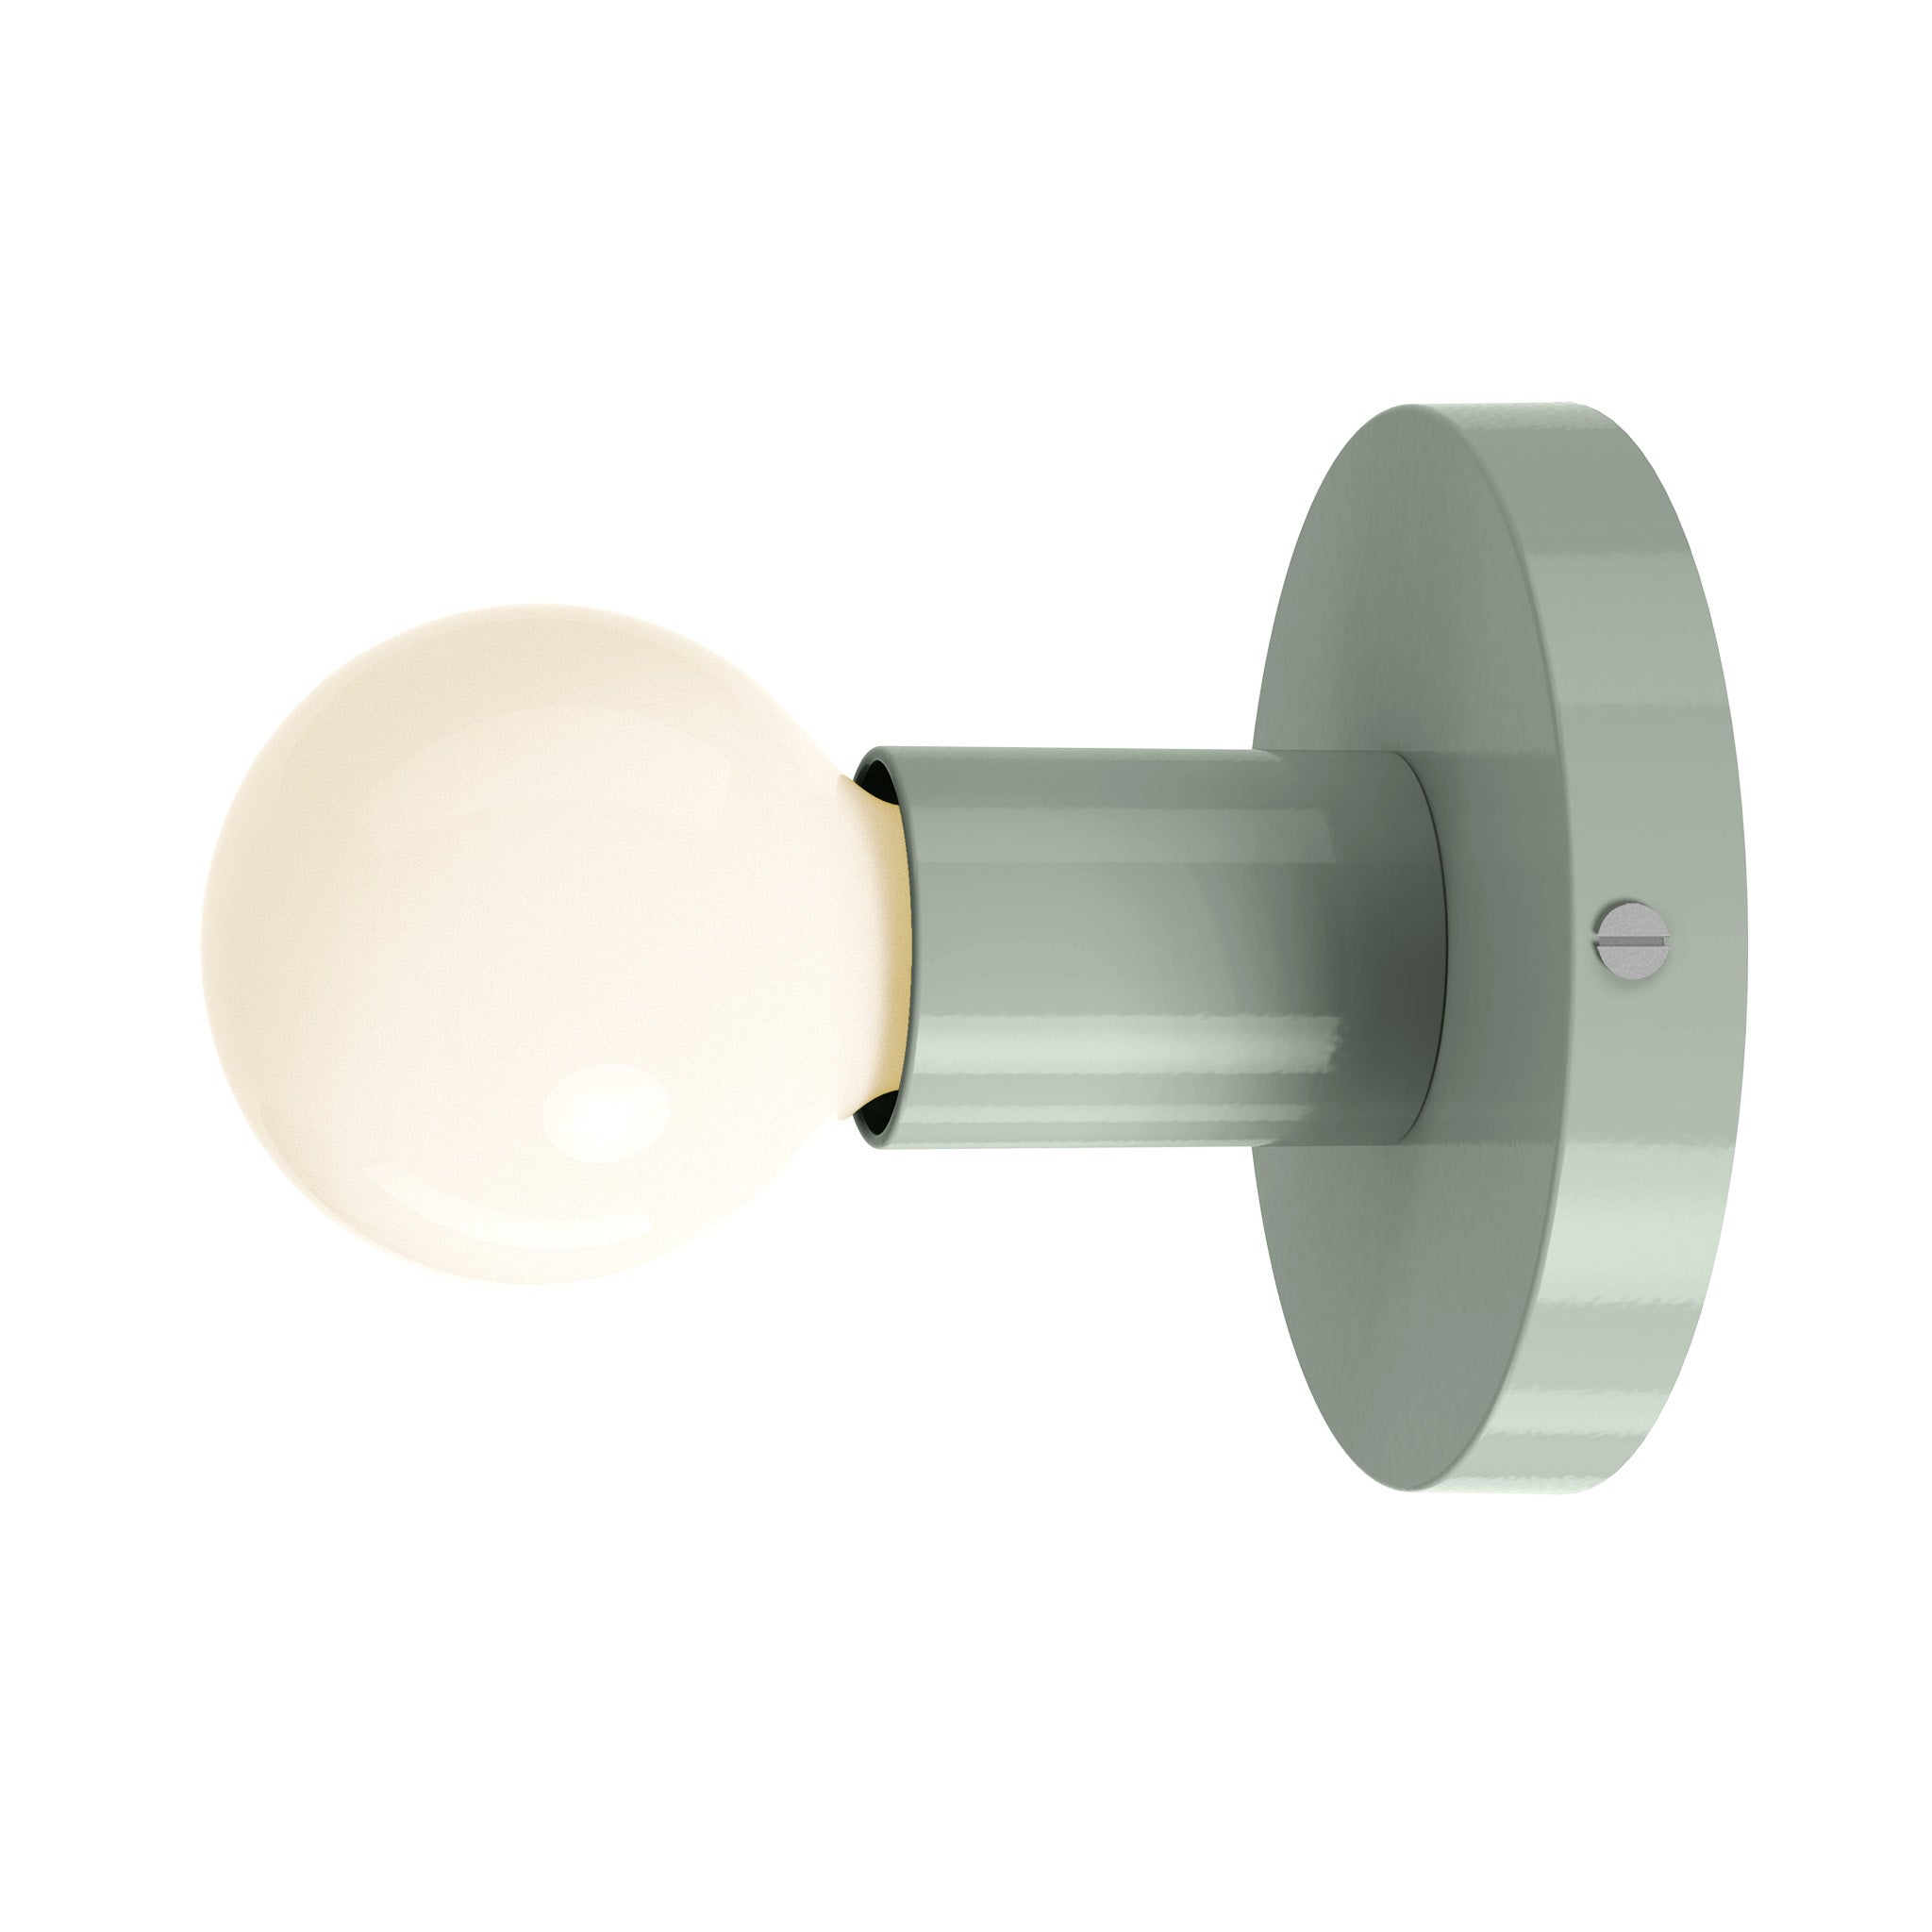 nickel spa color twink sconce dutton brown lighting